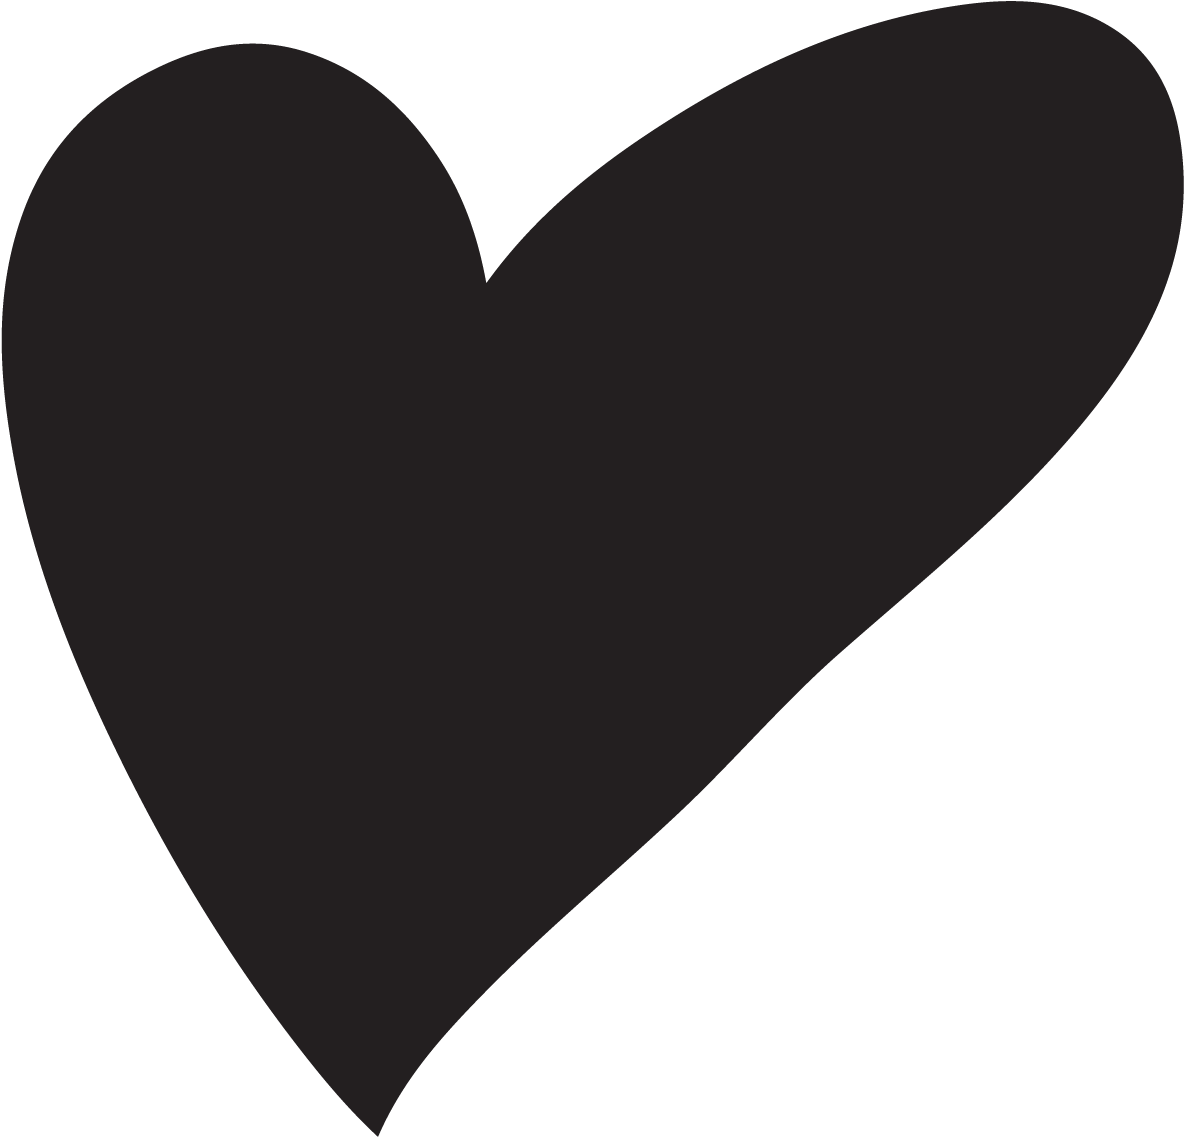 Drawn Heart Background PNG Image